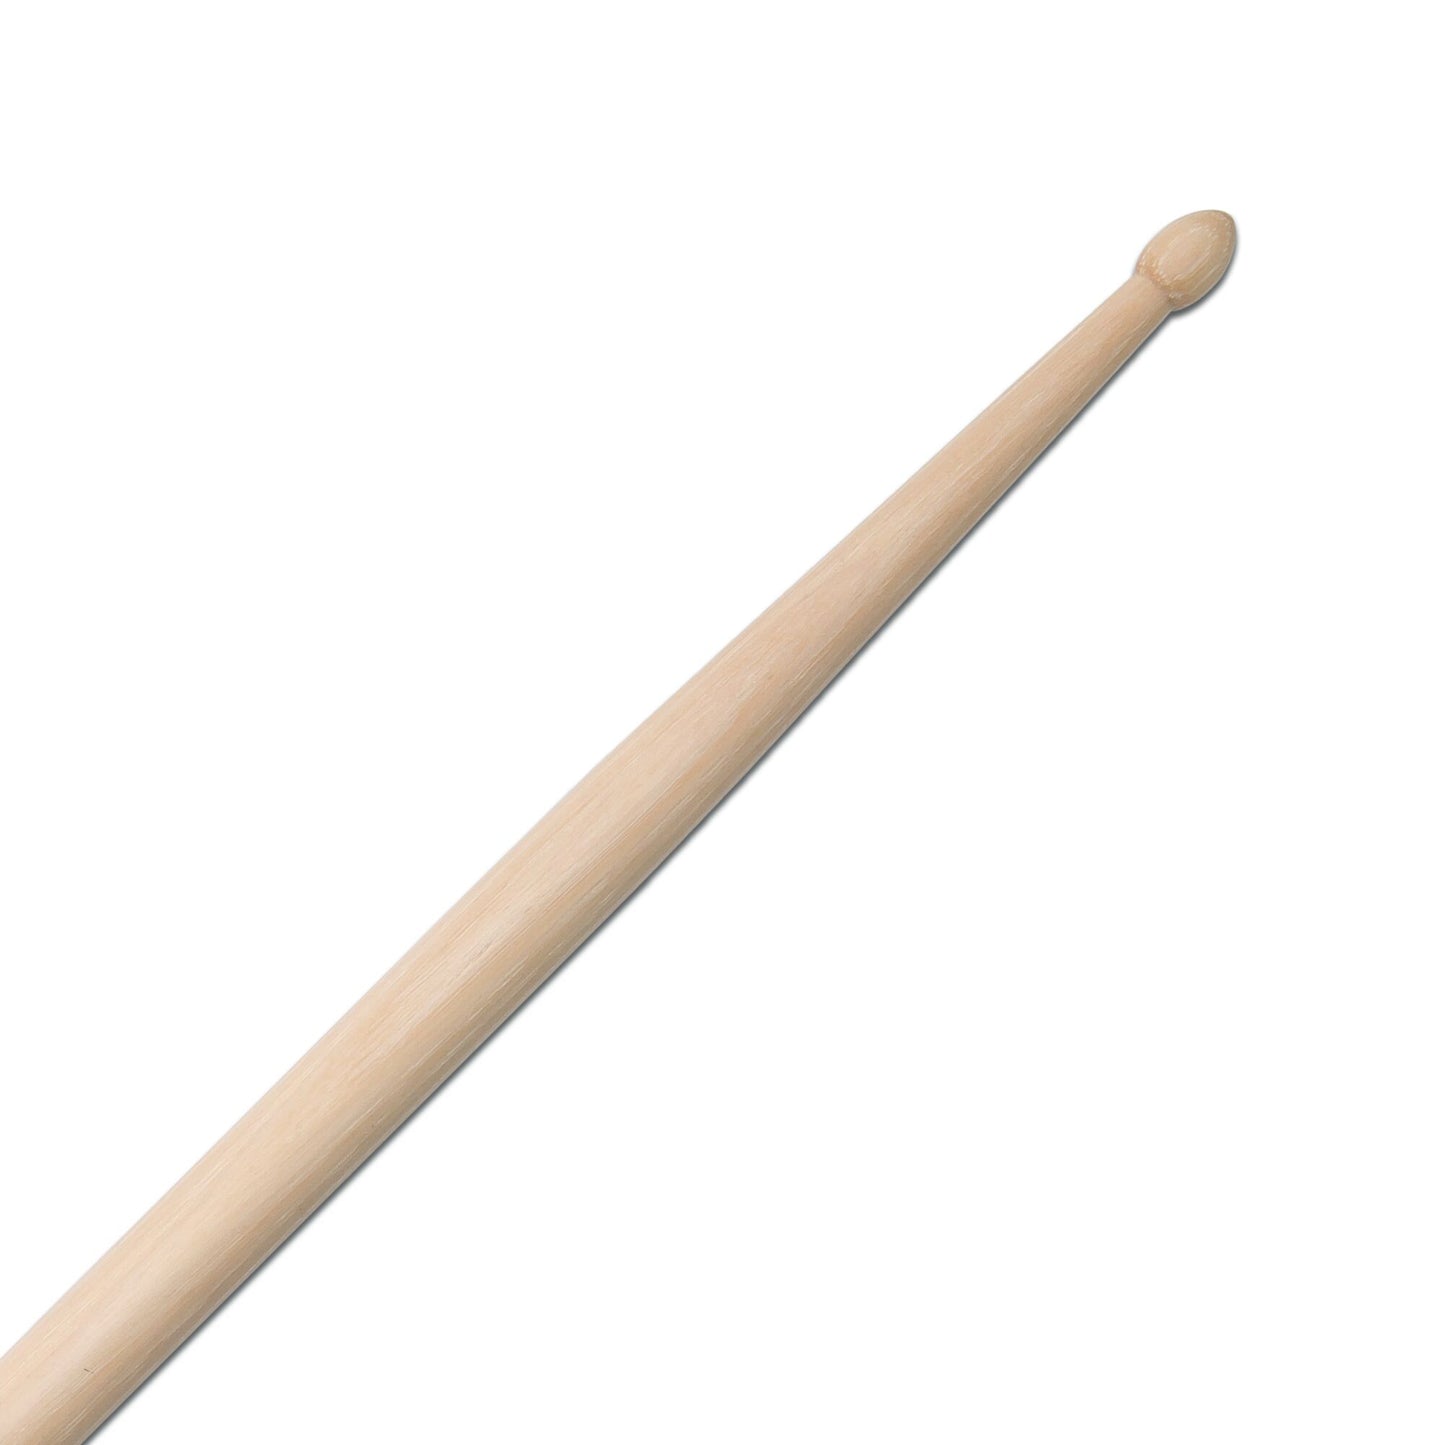 American Concept, Freestyle 5B Drumsticks